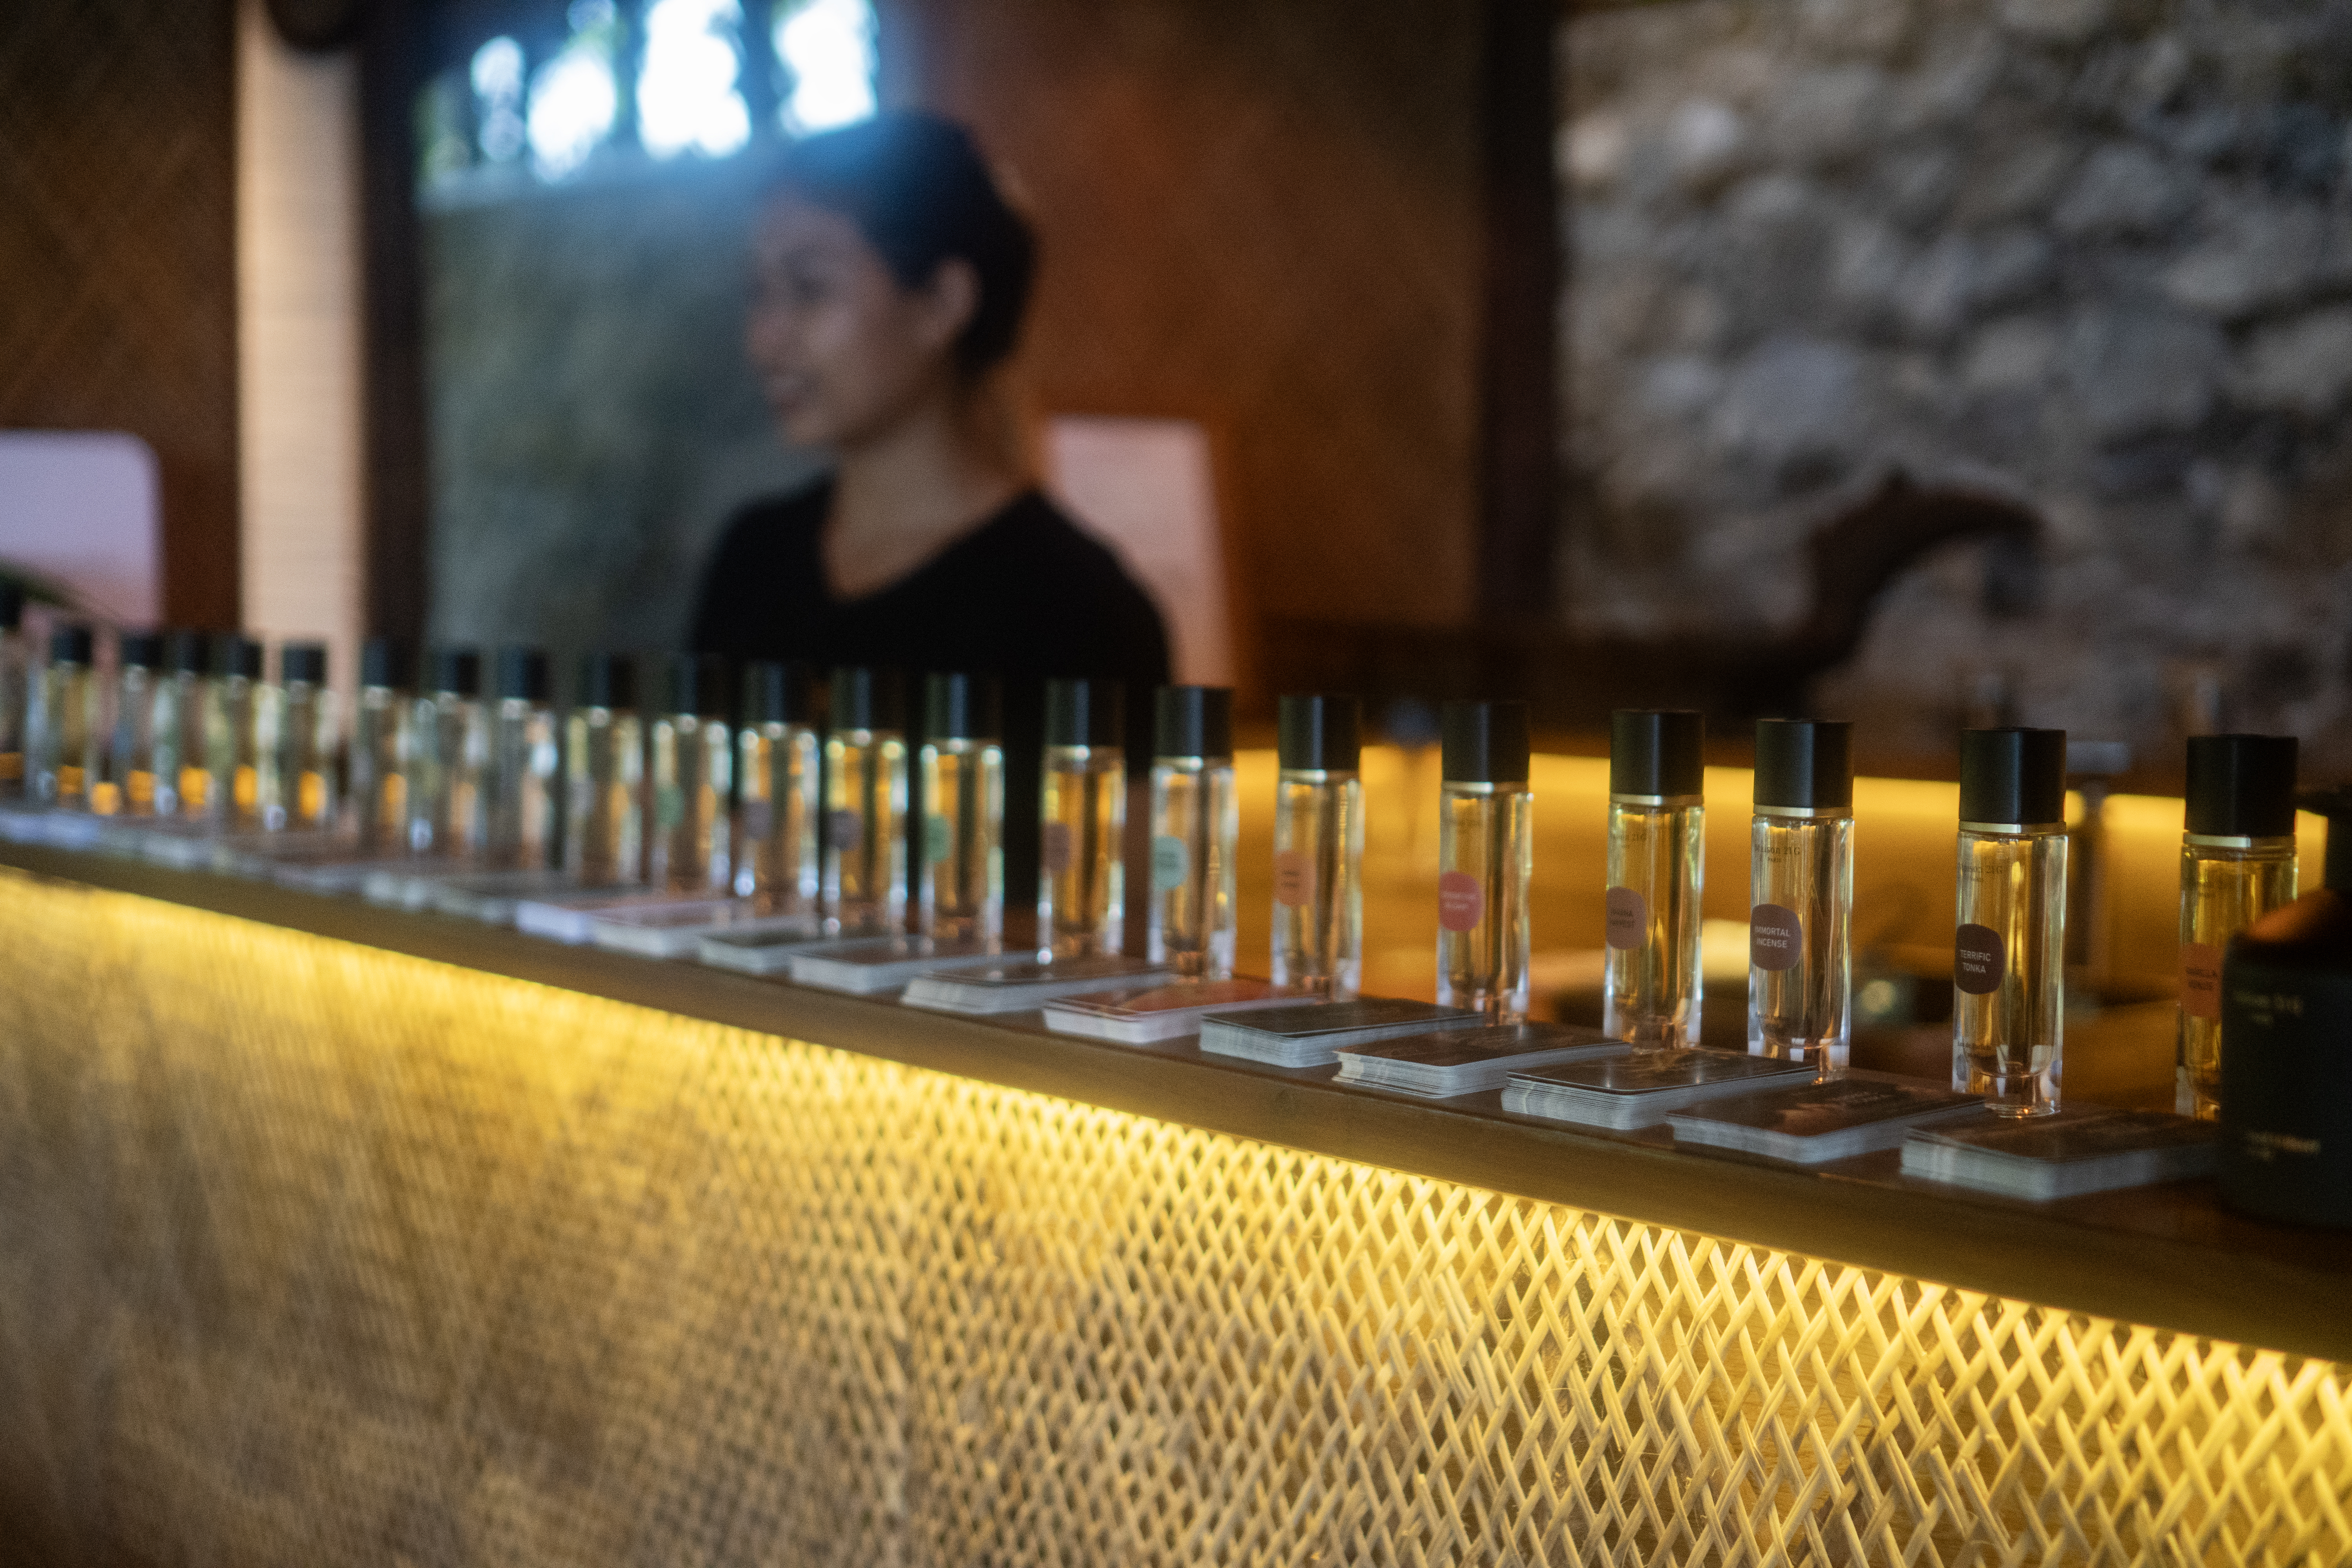 Introducing the Aura scent bar experience at Bawah Reserve in collaboration with Maison21G.